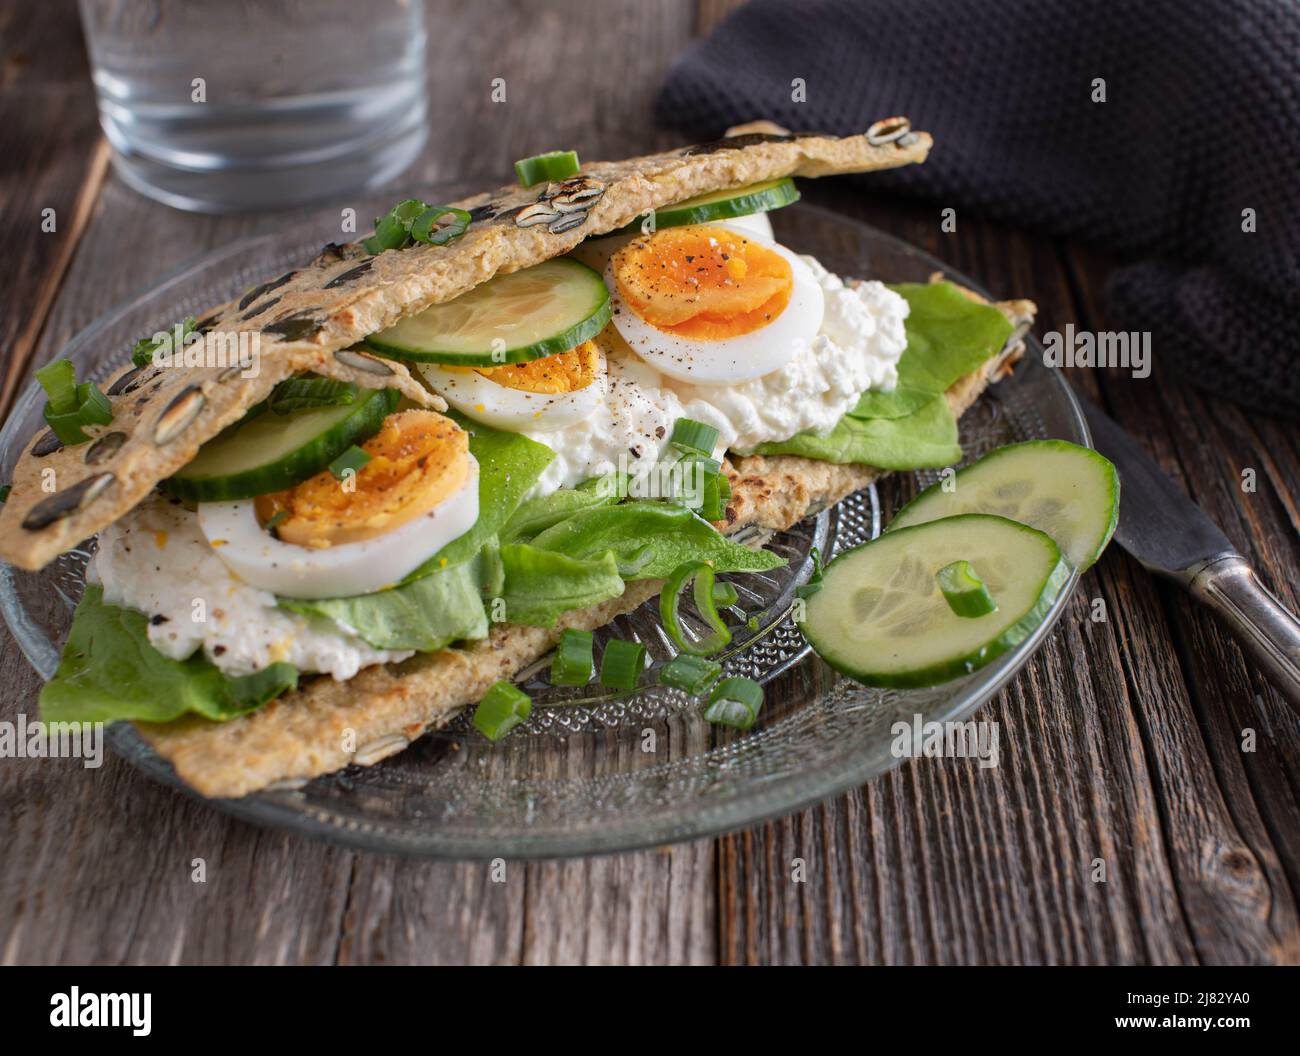 High protein sandwich with a oatmeal pancake filled with cottage cheese, boiled eggs and vegetables. Stock Photo